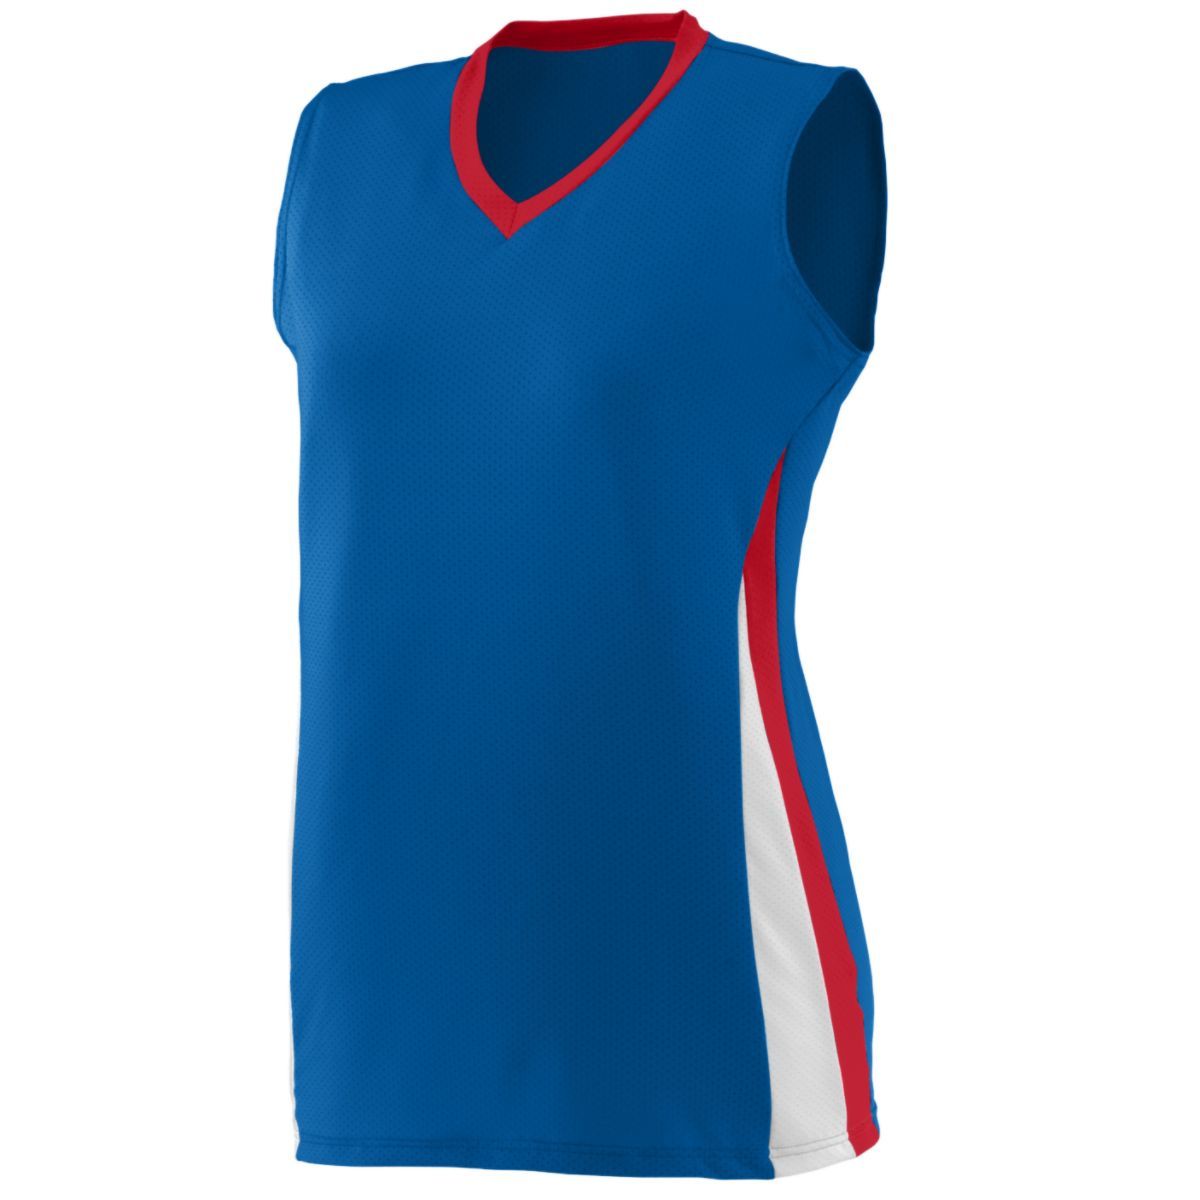 Augusta Sportswear Ladies Tornado Jersey in Royal/Red/White  -Part of the Ladies, Ladies-Jersey, Augusta-Products, Volleyball, Shirts product lines at KanaleyCreations.com